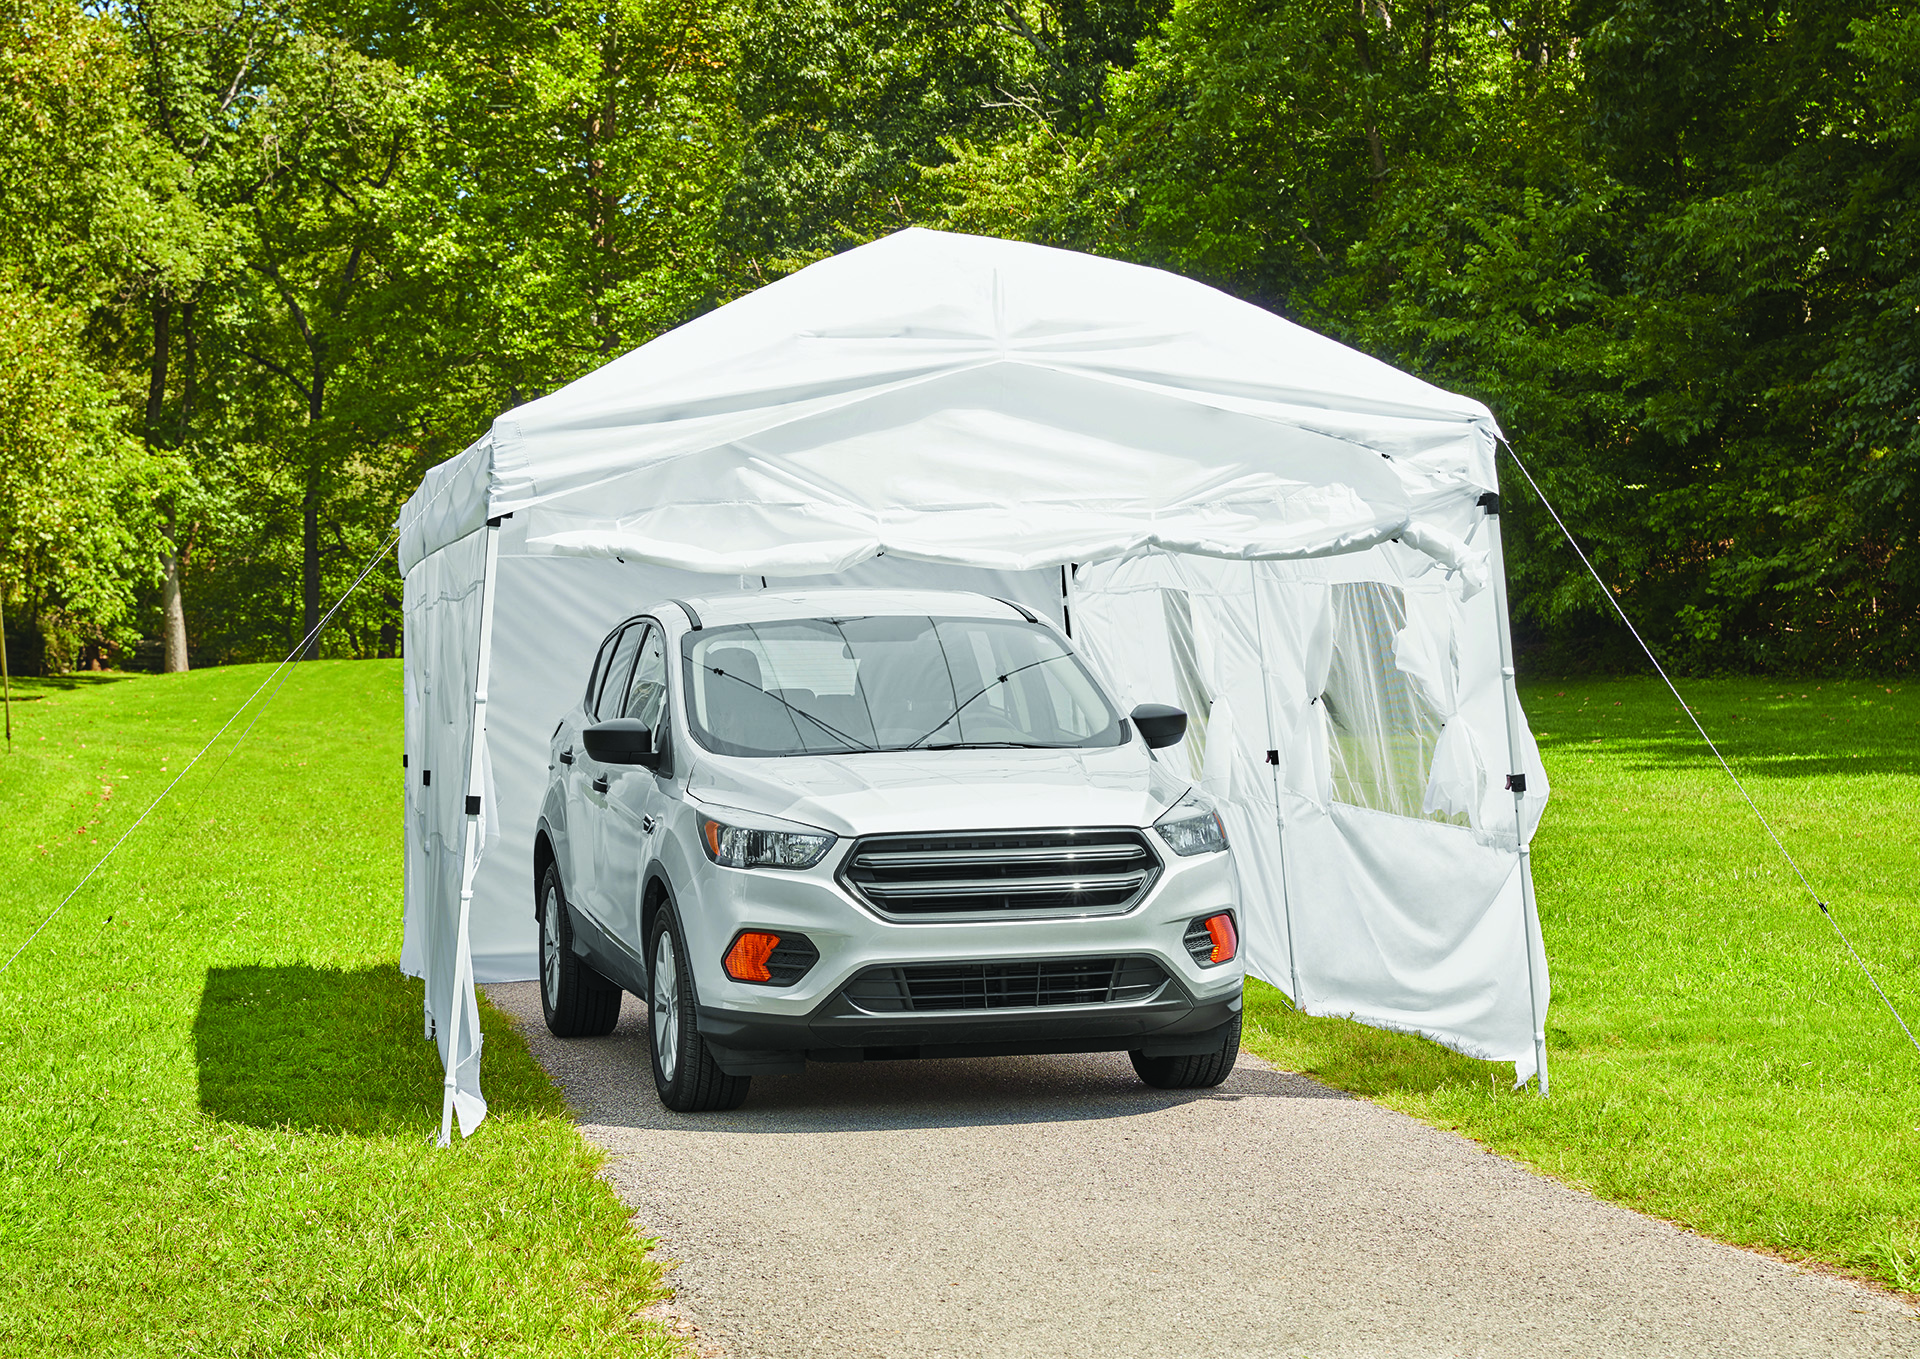 Ozark Trail 10x20 Straight Leg Instant Canopy - Includes Carry Bag, 6 Sidewalls, Stakes, and Tie Out Lines - image 5 of 13